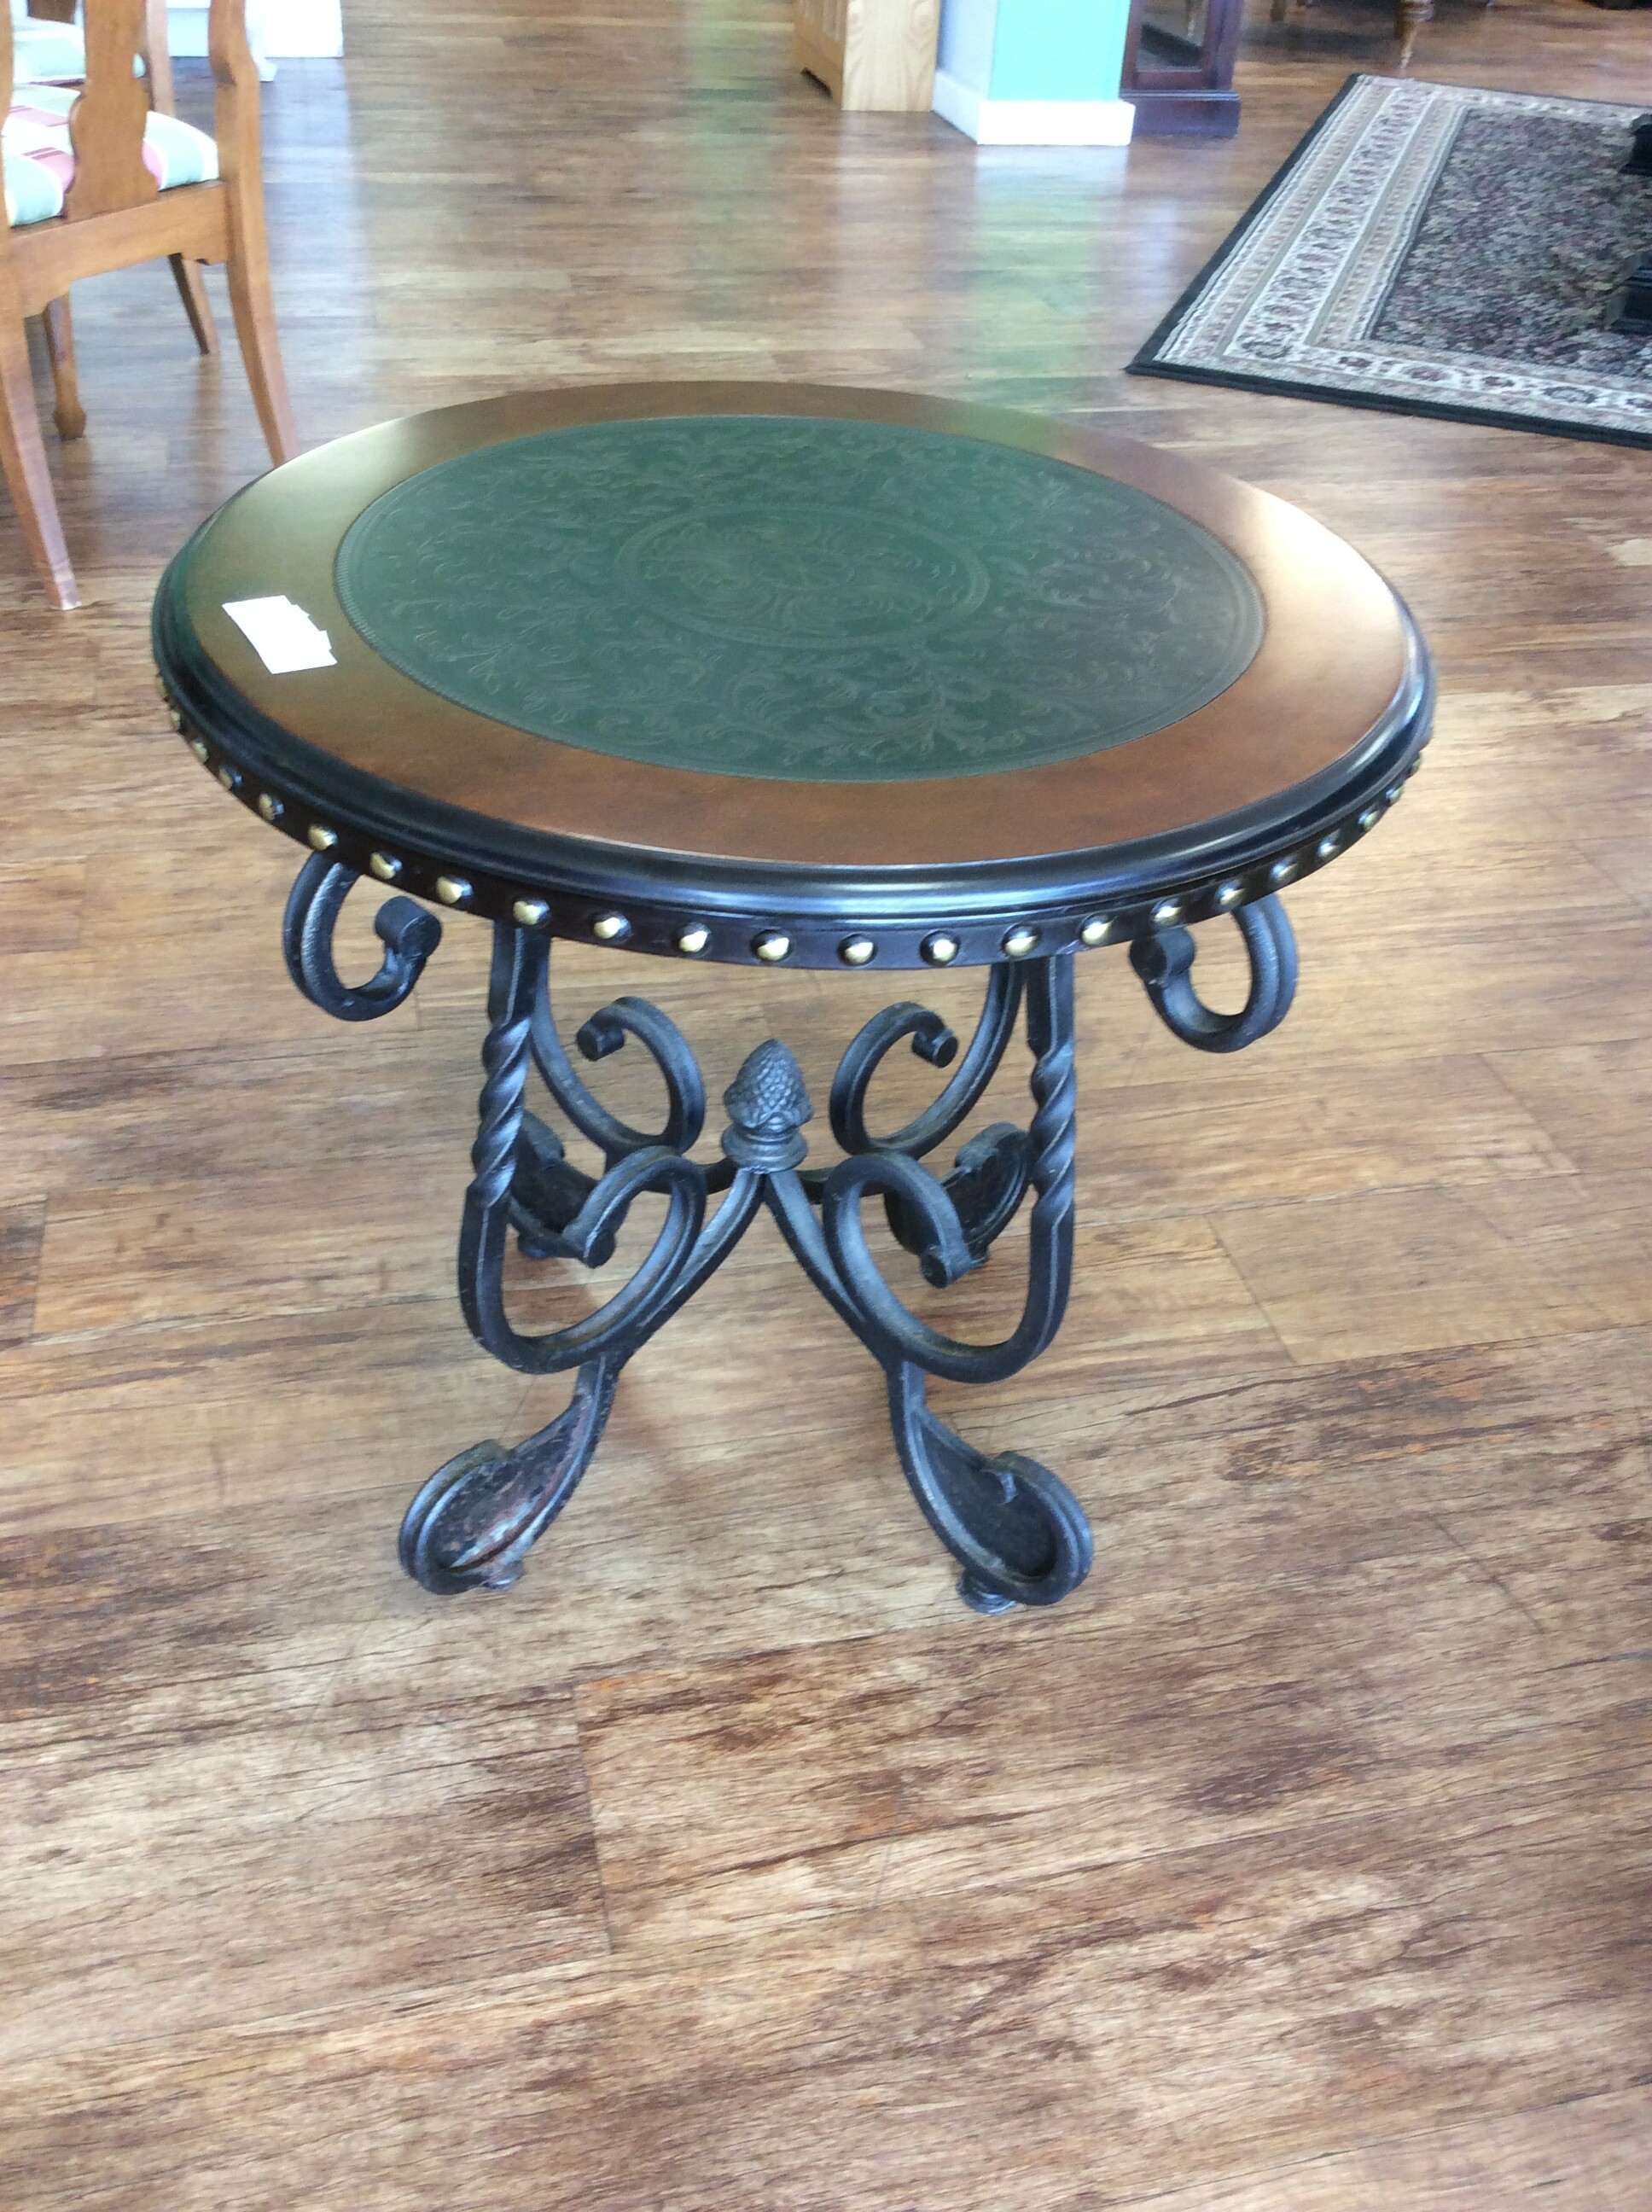 This round occasional table has a embossed metal insert with a wrought iron base.